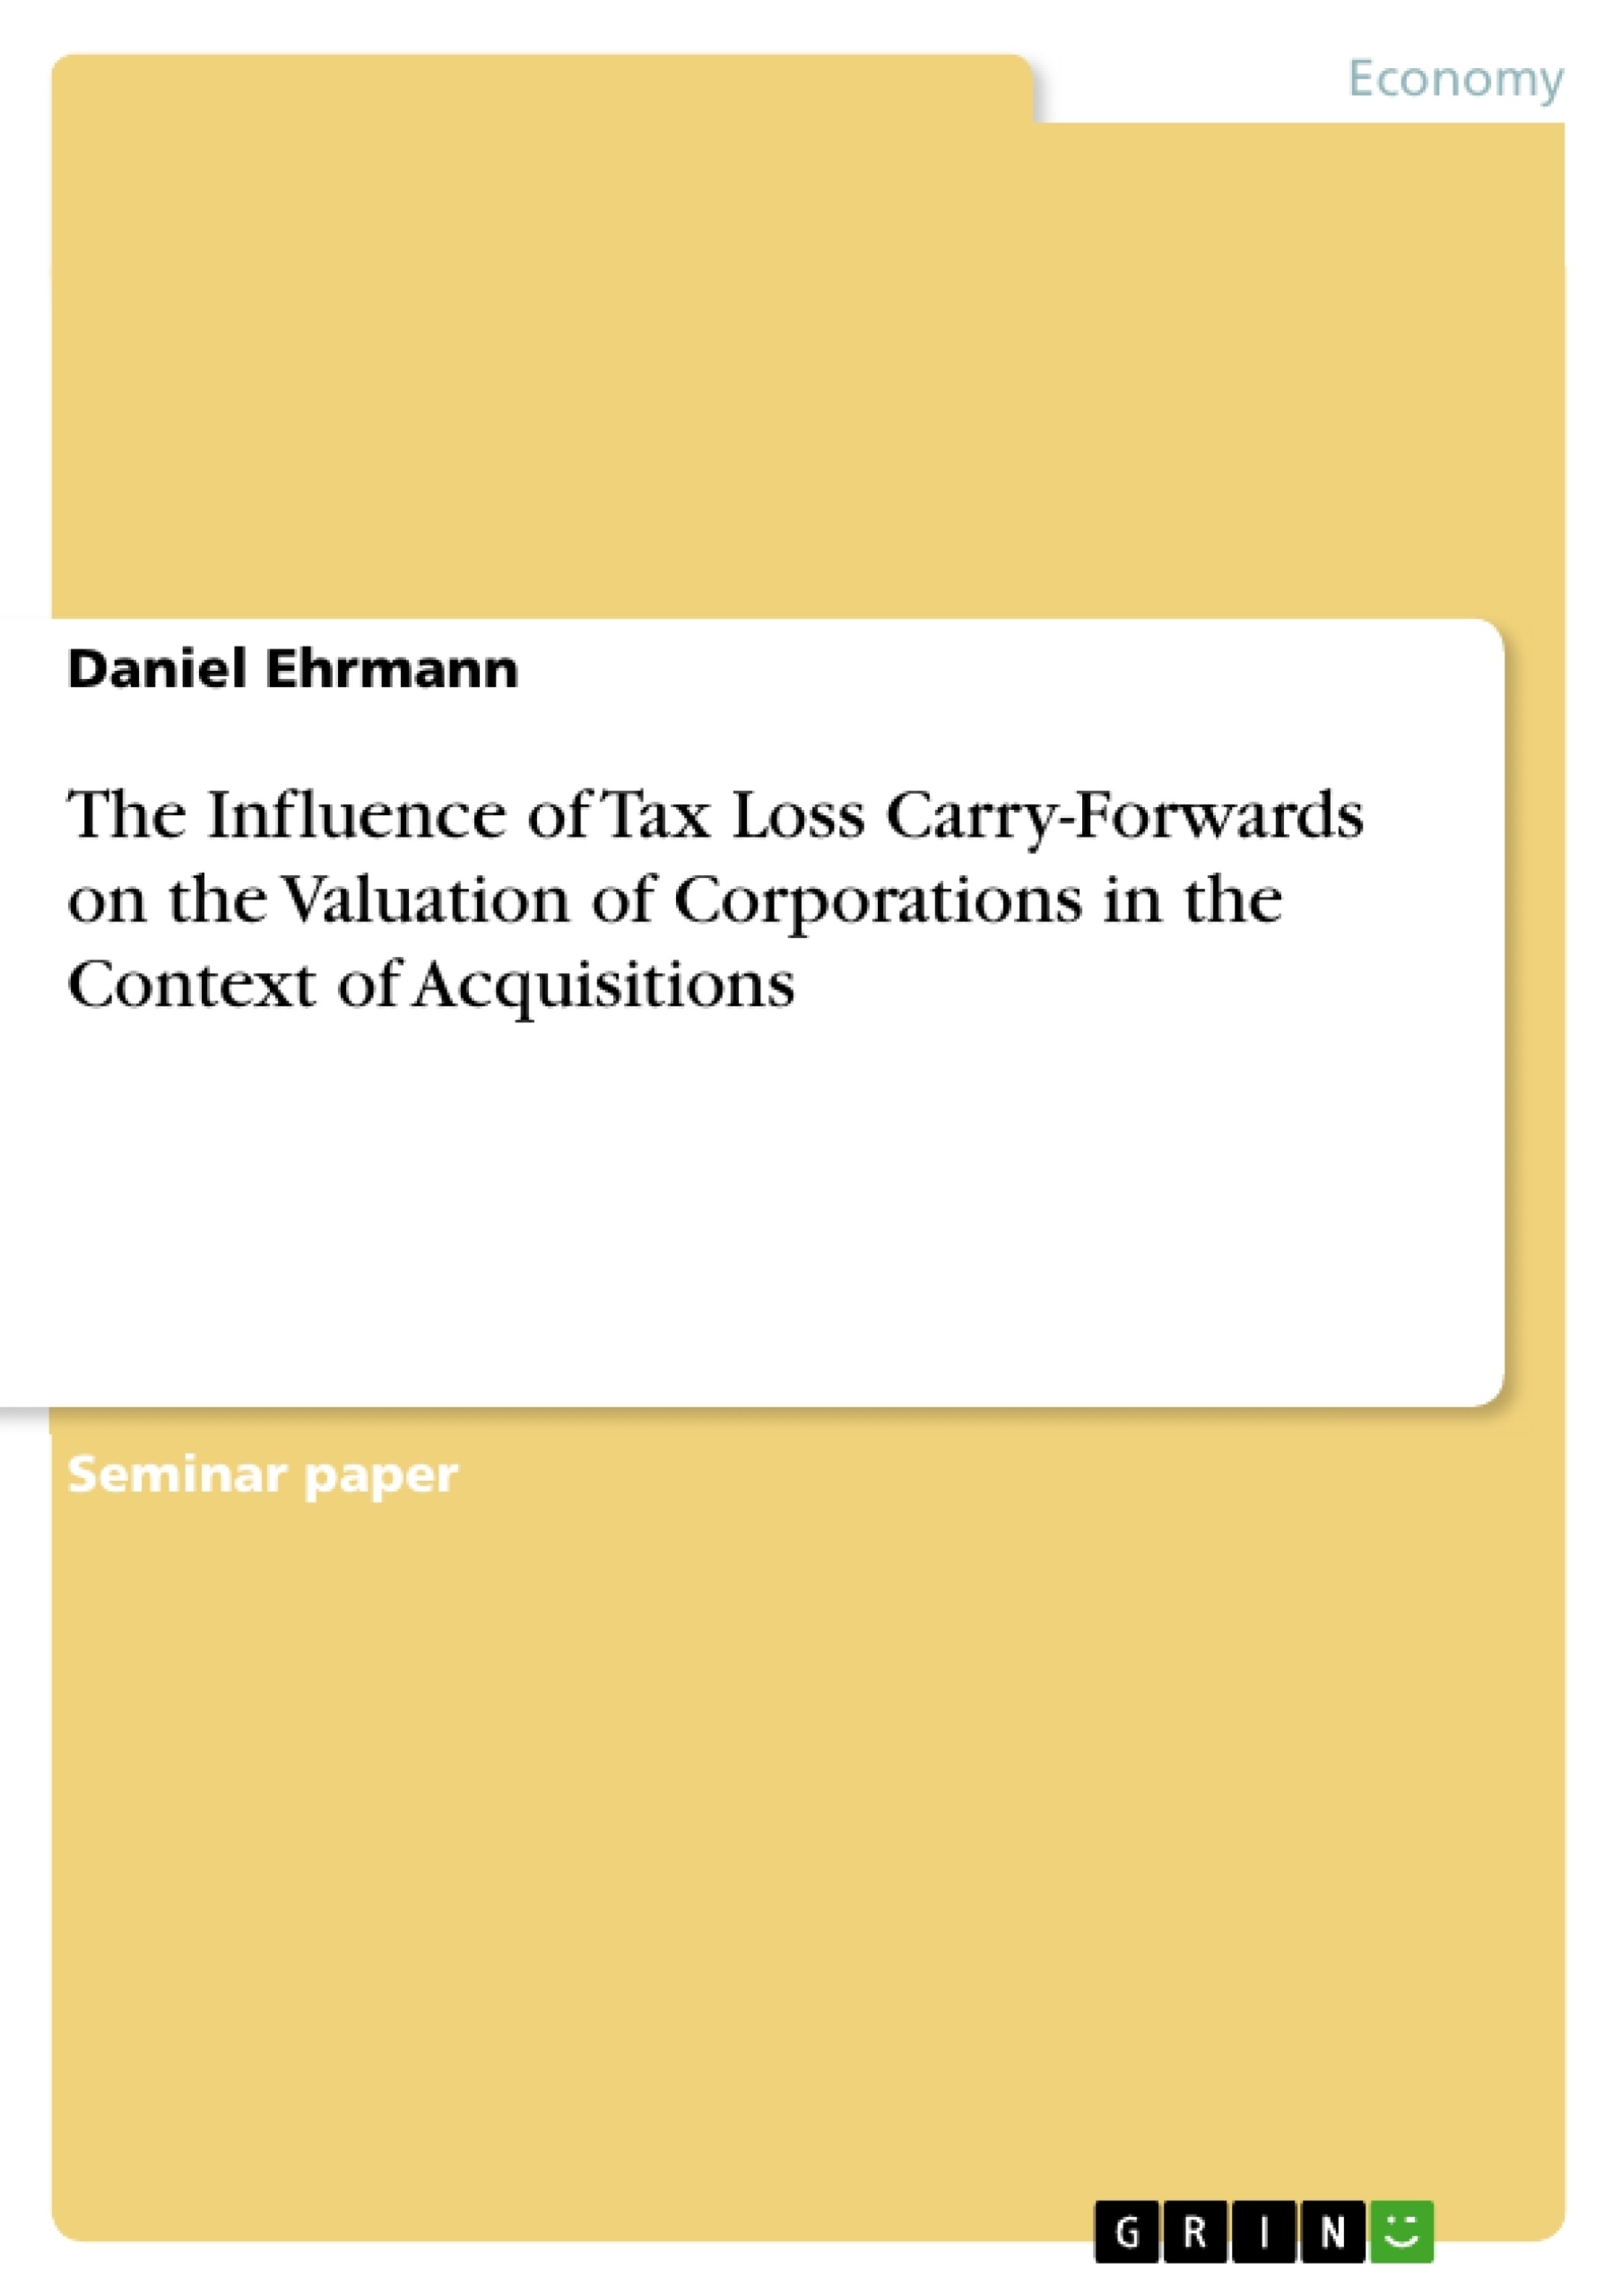 Título: The Influence of Tax Loss Carry-Forwards on the Valuation of Corporations in the Context of Acquisitions